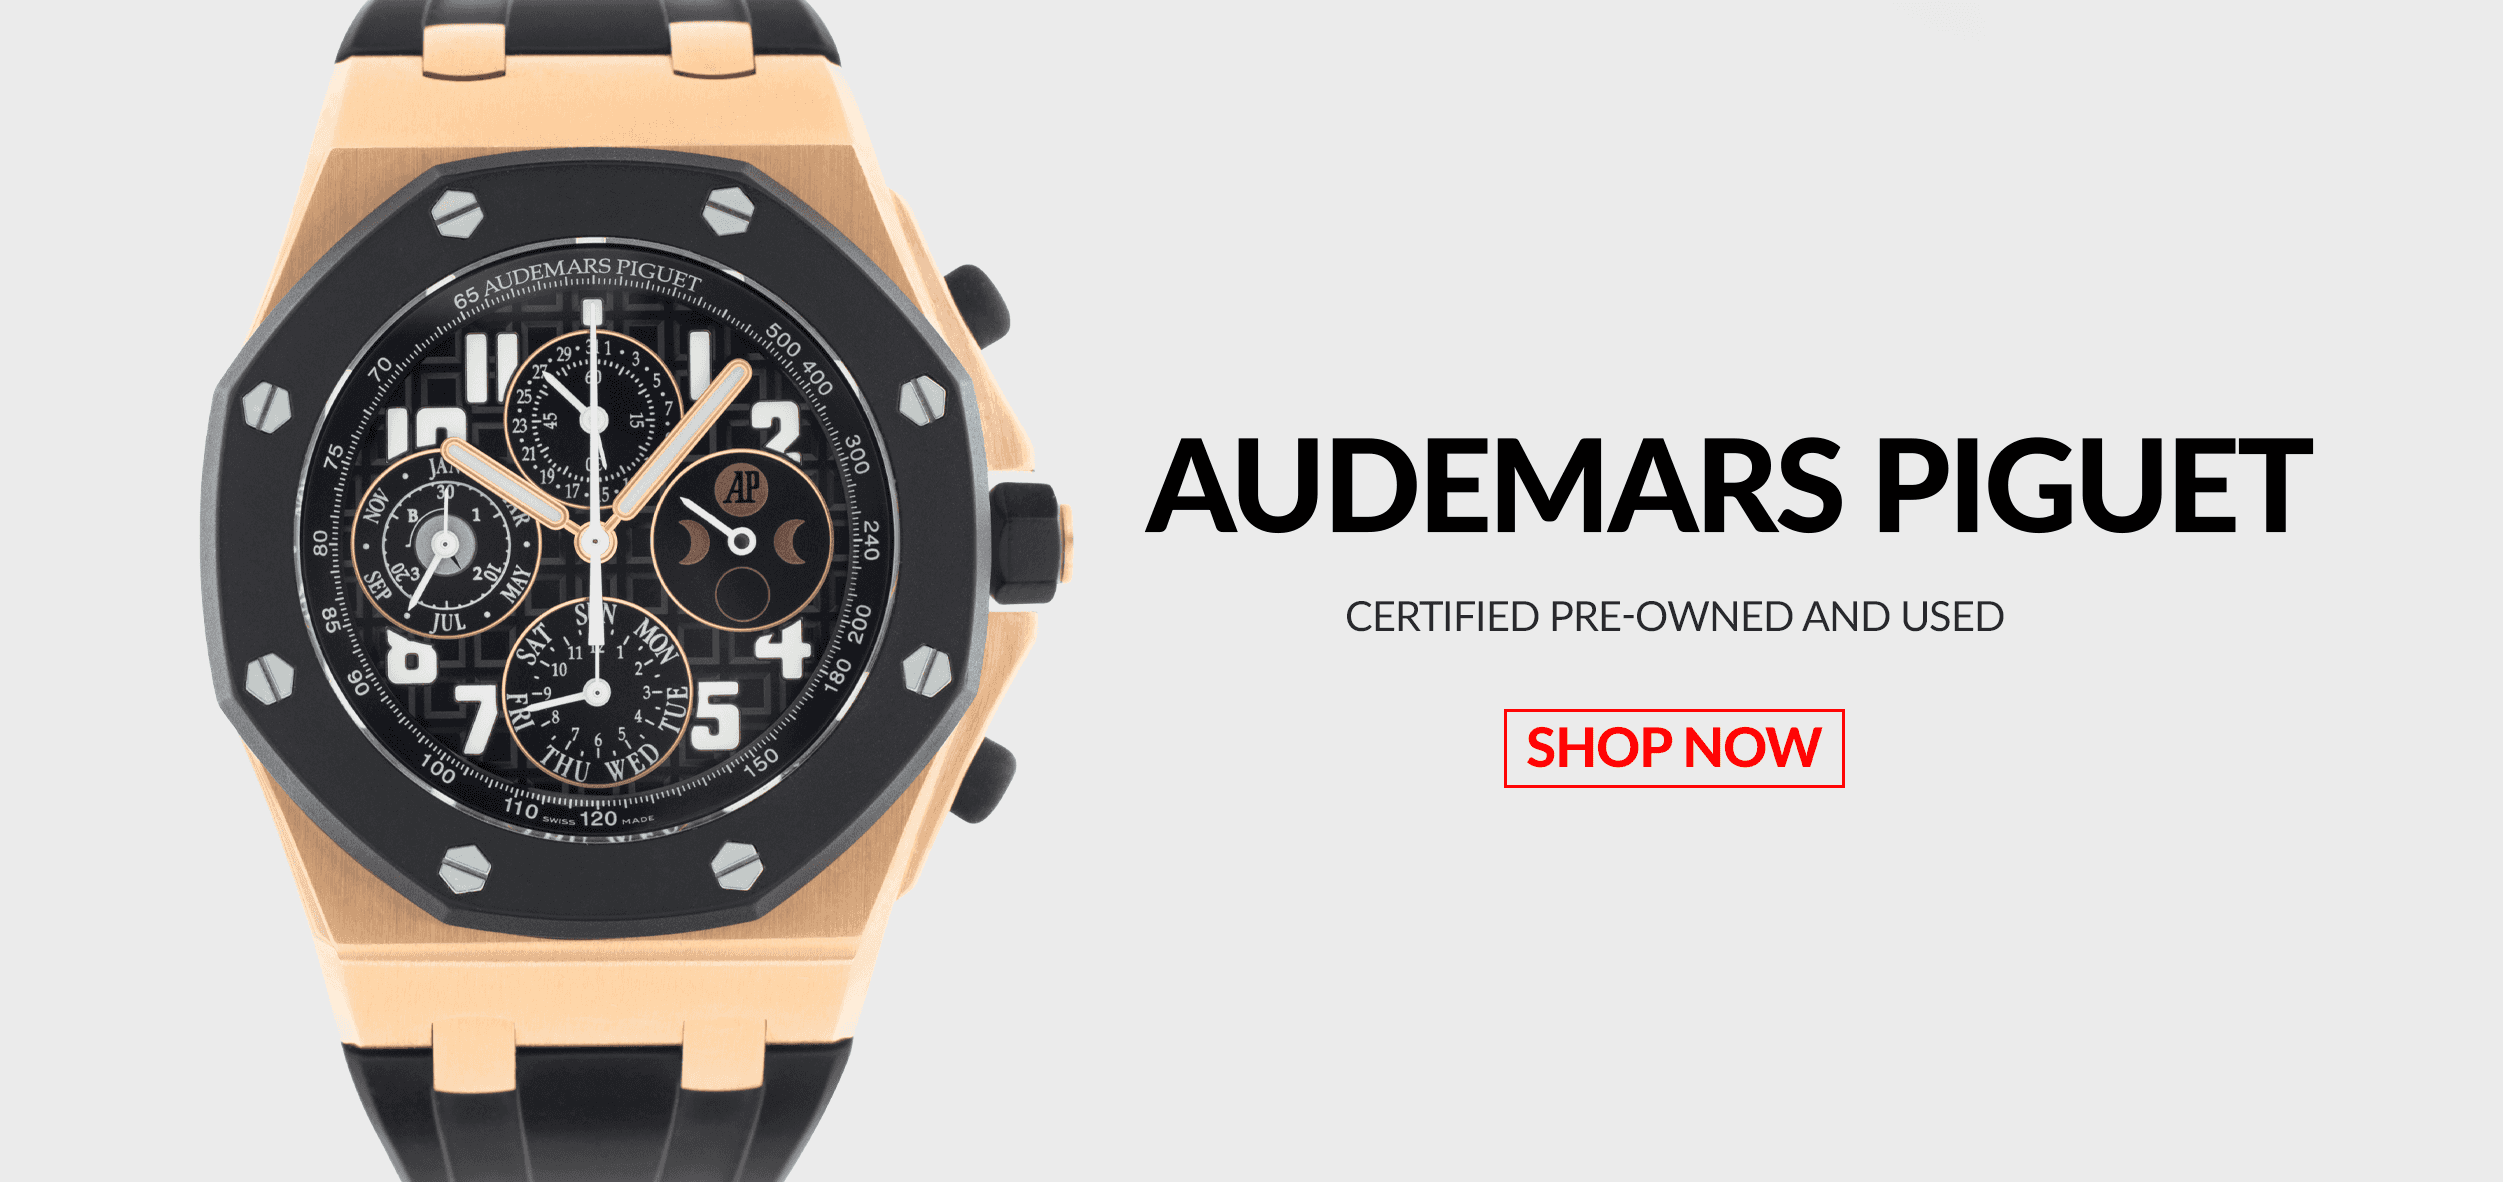 Pre-Owned Certified Used Audemars Piguet Watches Header